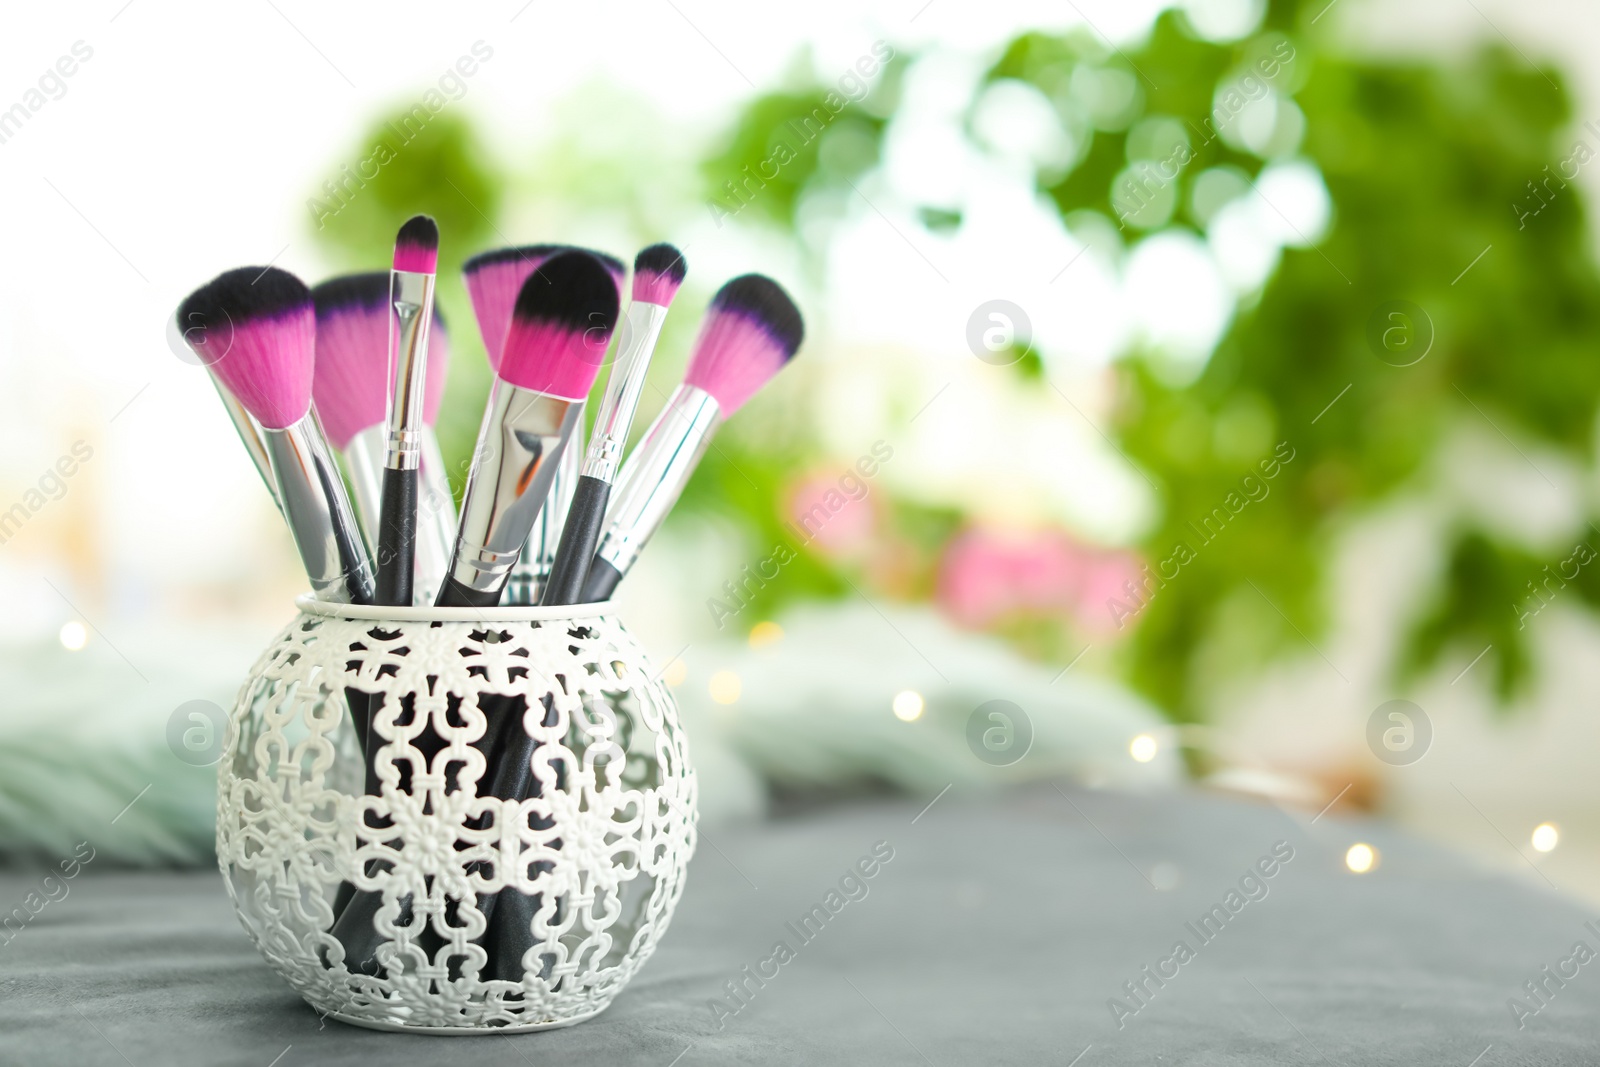 Photo of Makeup brushes in holder on blurred background